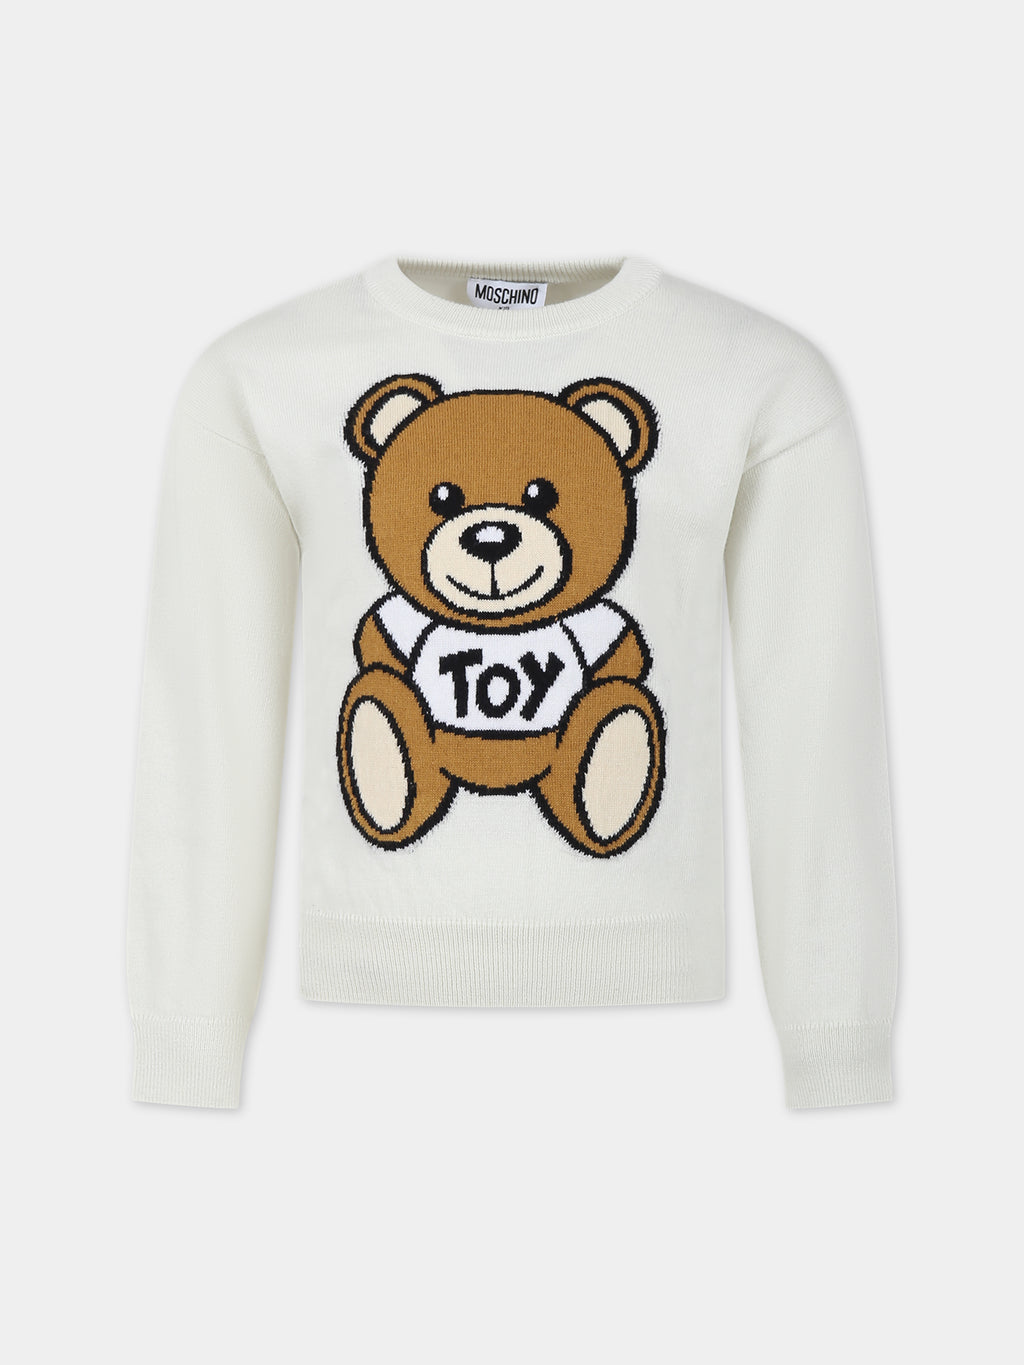 White sweater for kids with Teddy Bear